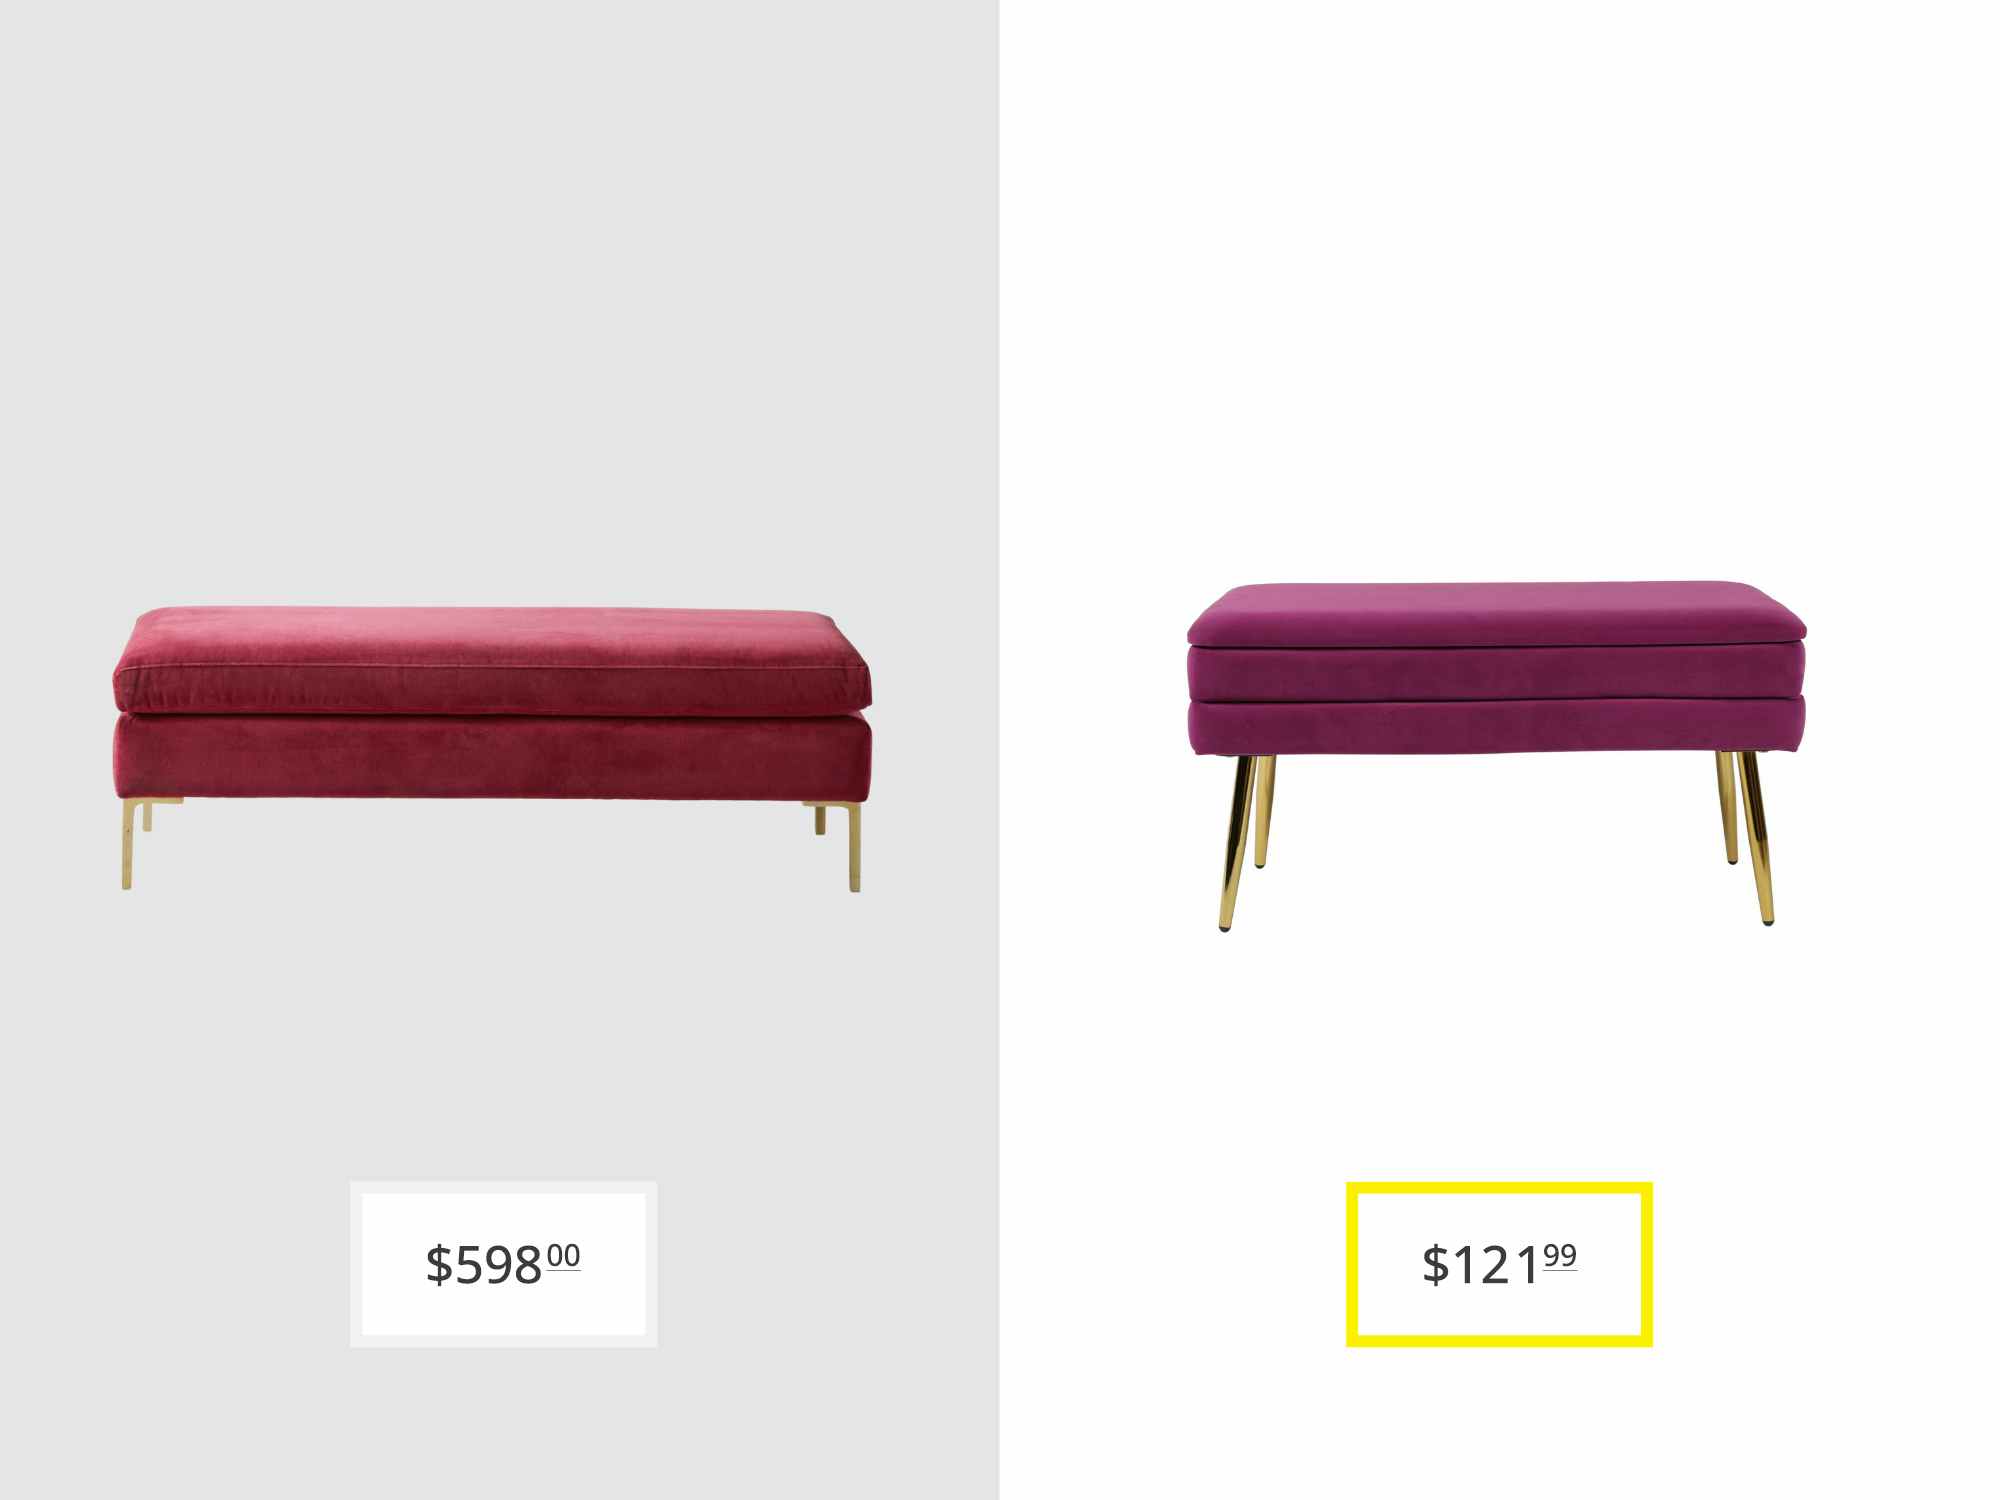 price comparison graphic with anthropologie edlyn bench and grayton storage bench